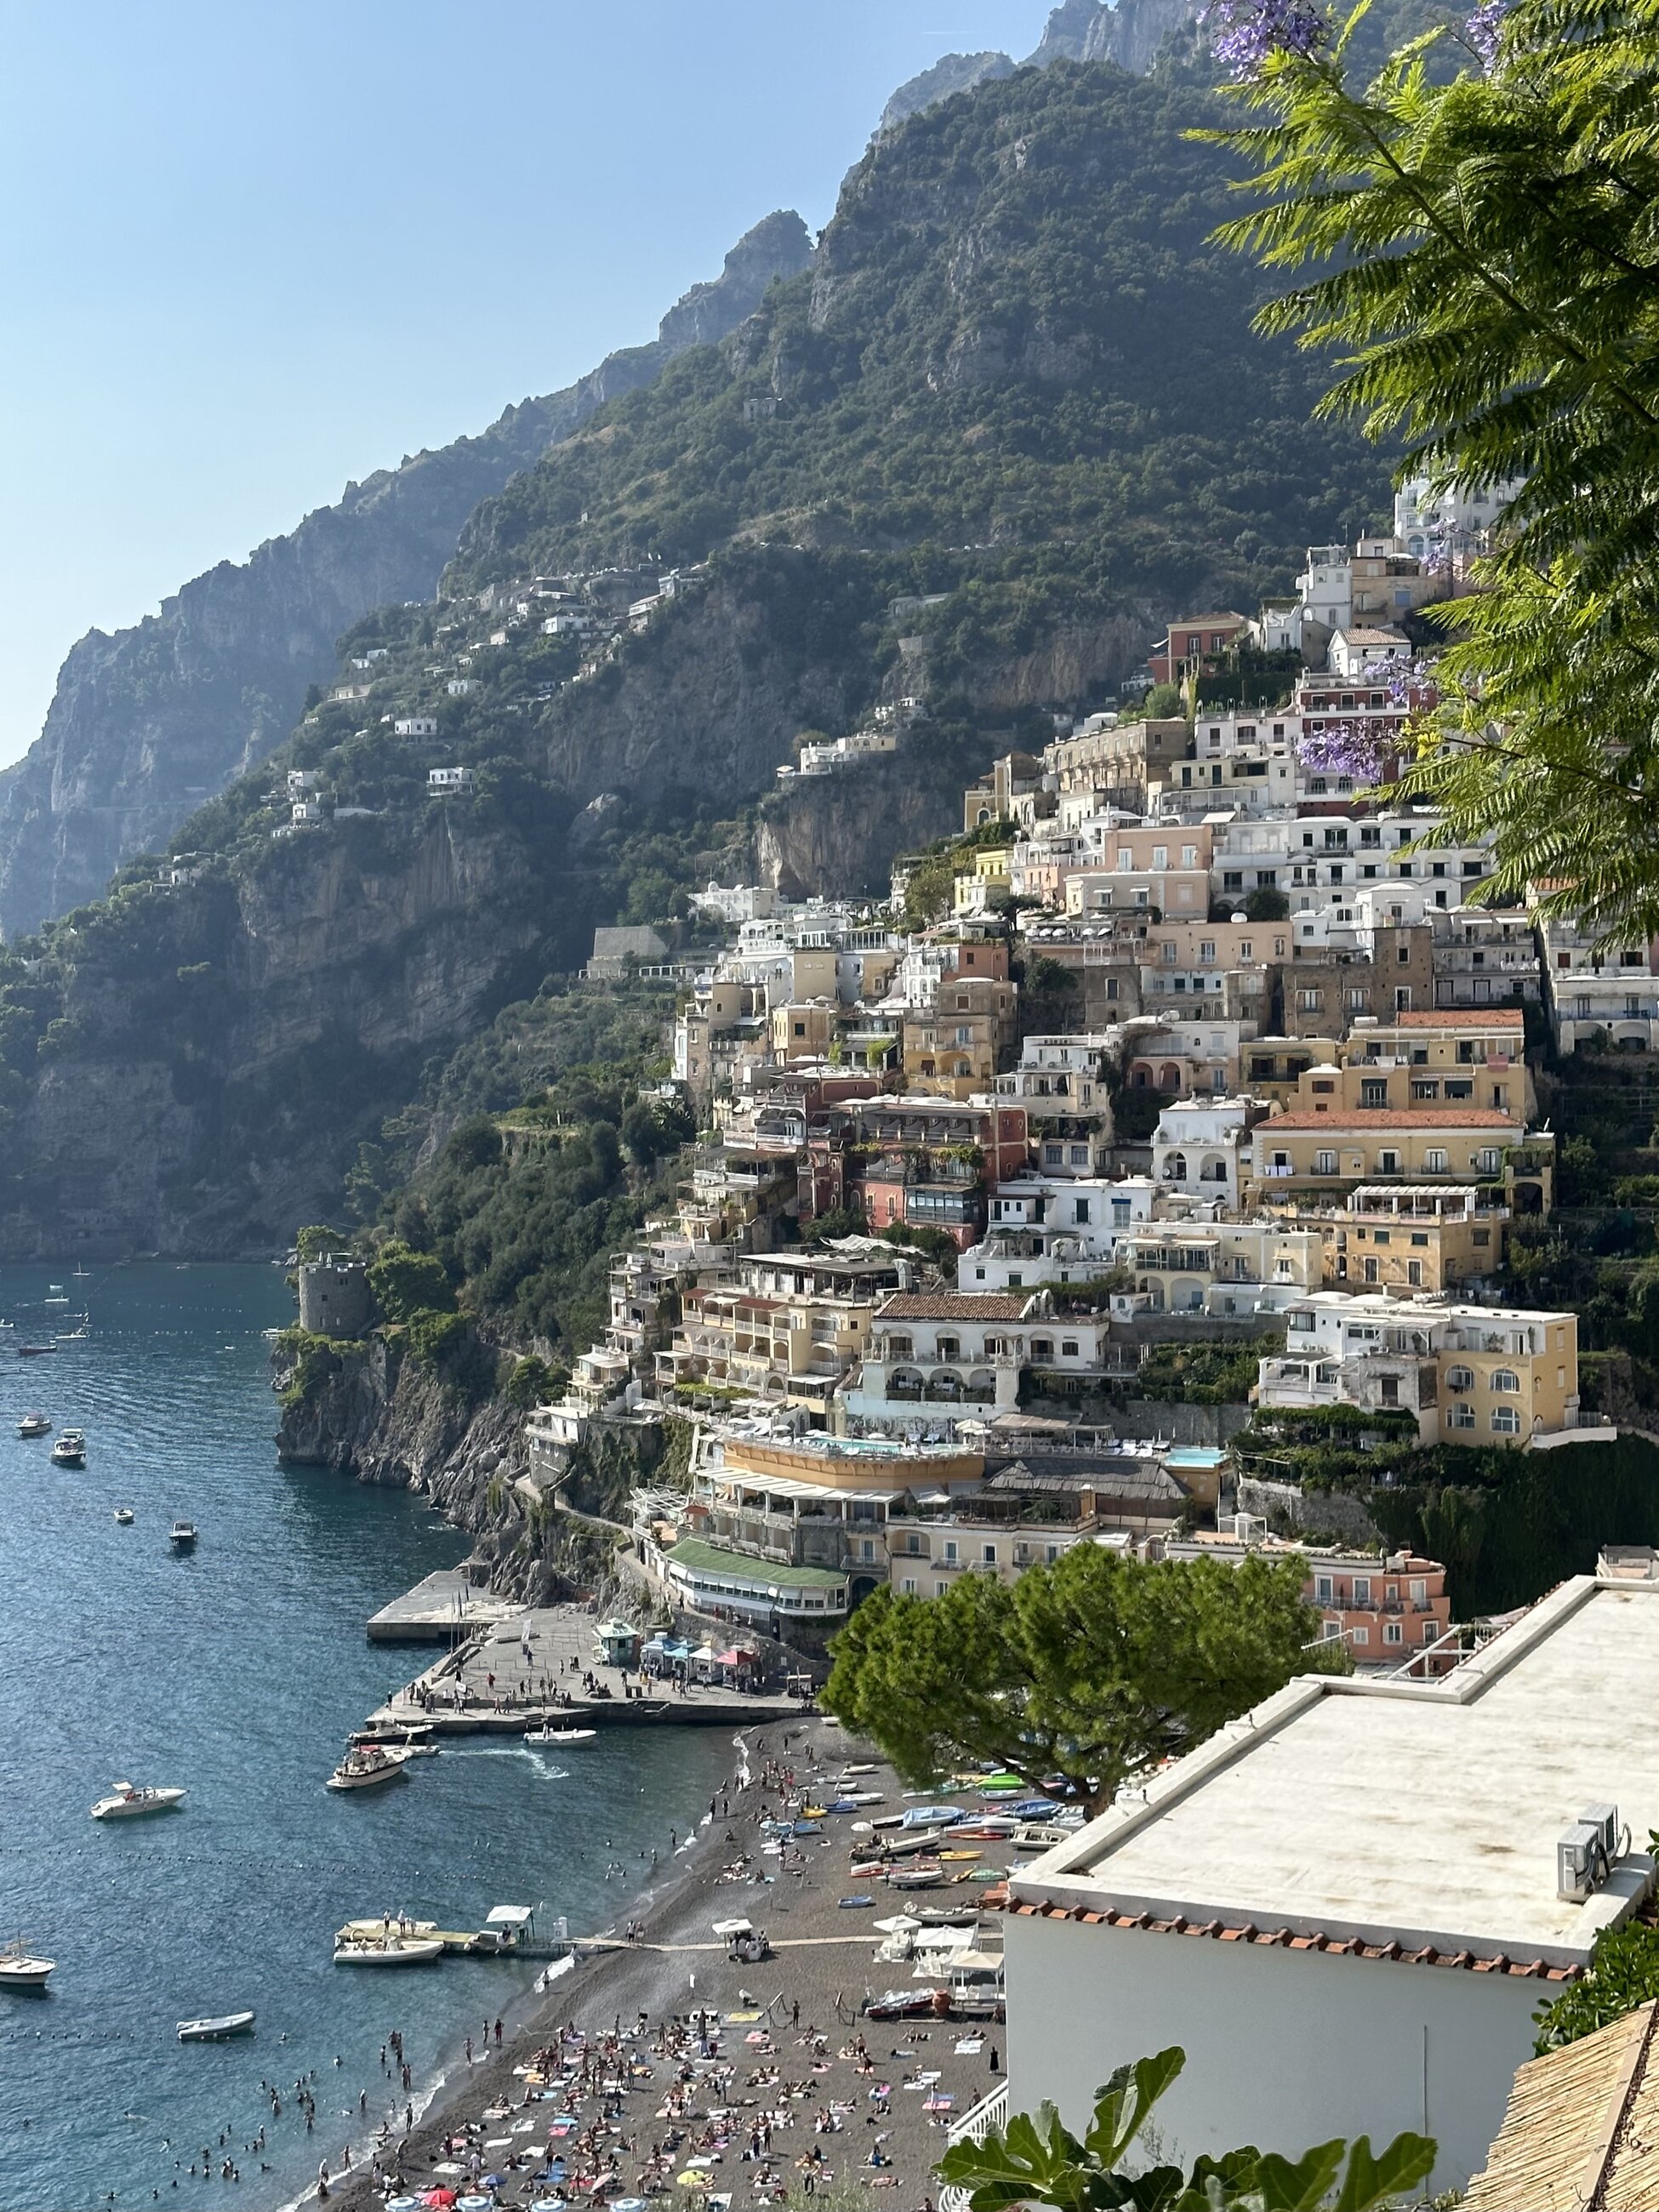 After a hike over The Path of Gods you end with a view of Positano